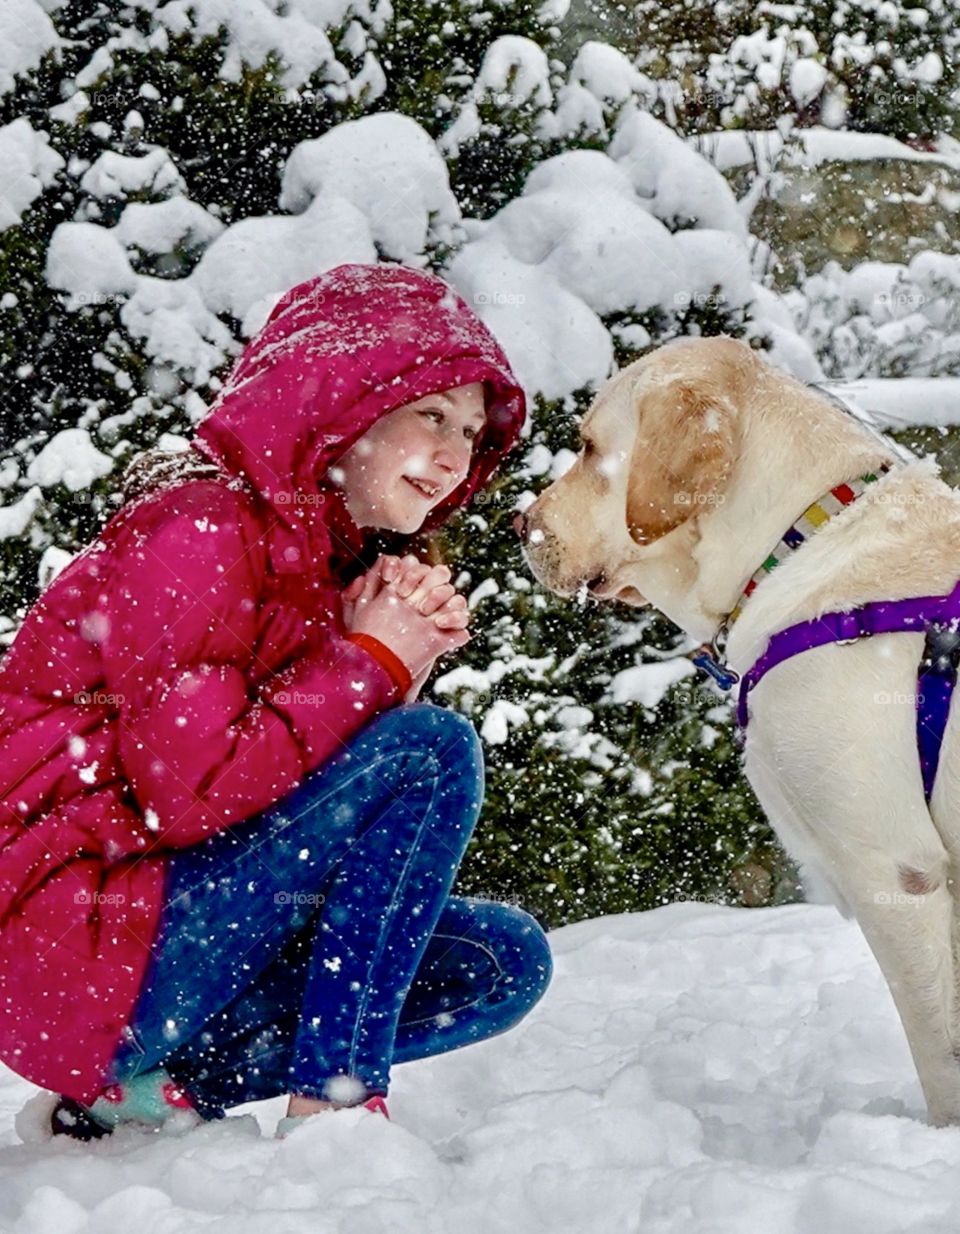 Snow falls on girl and her dog